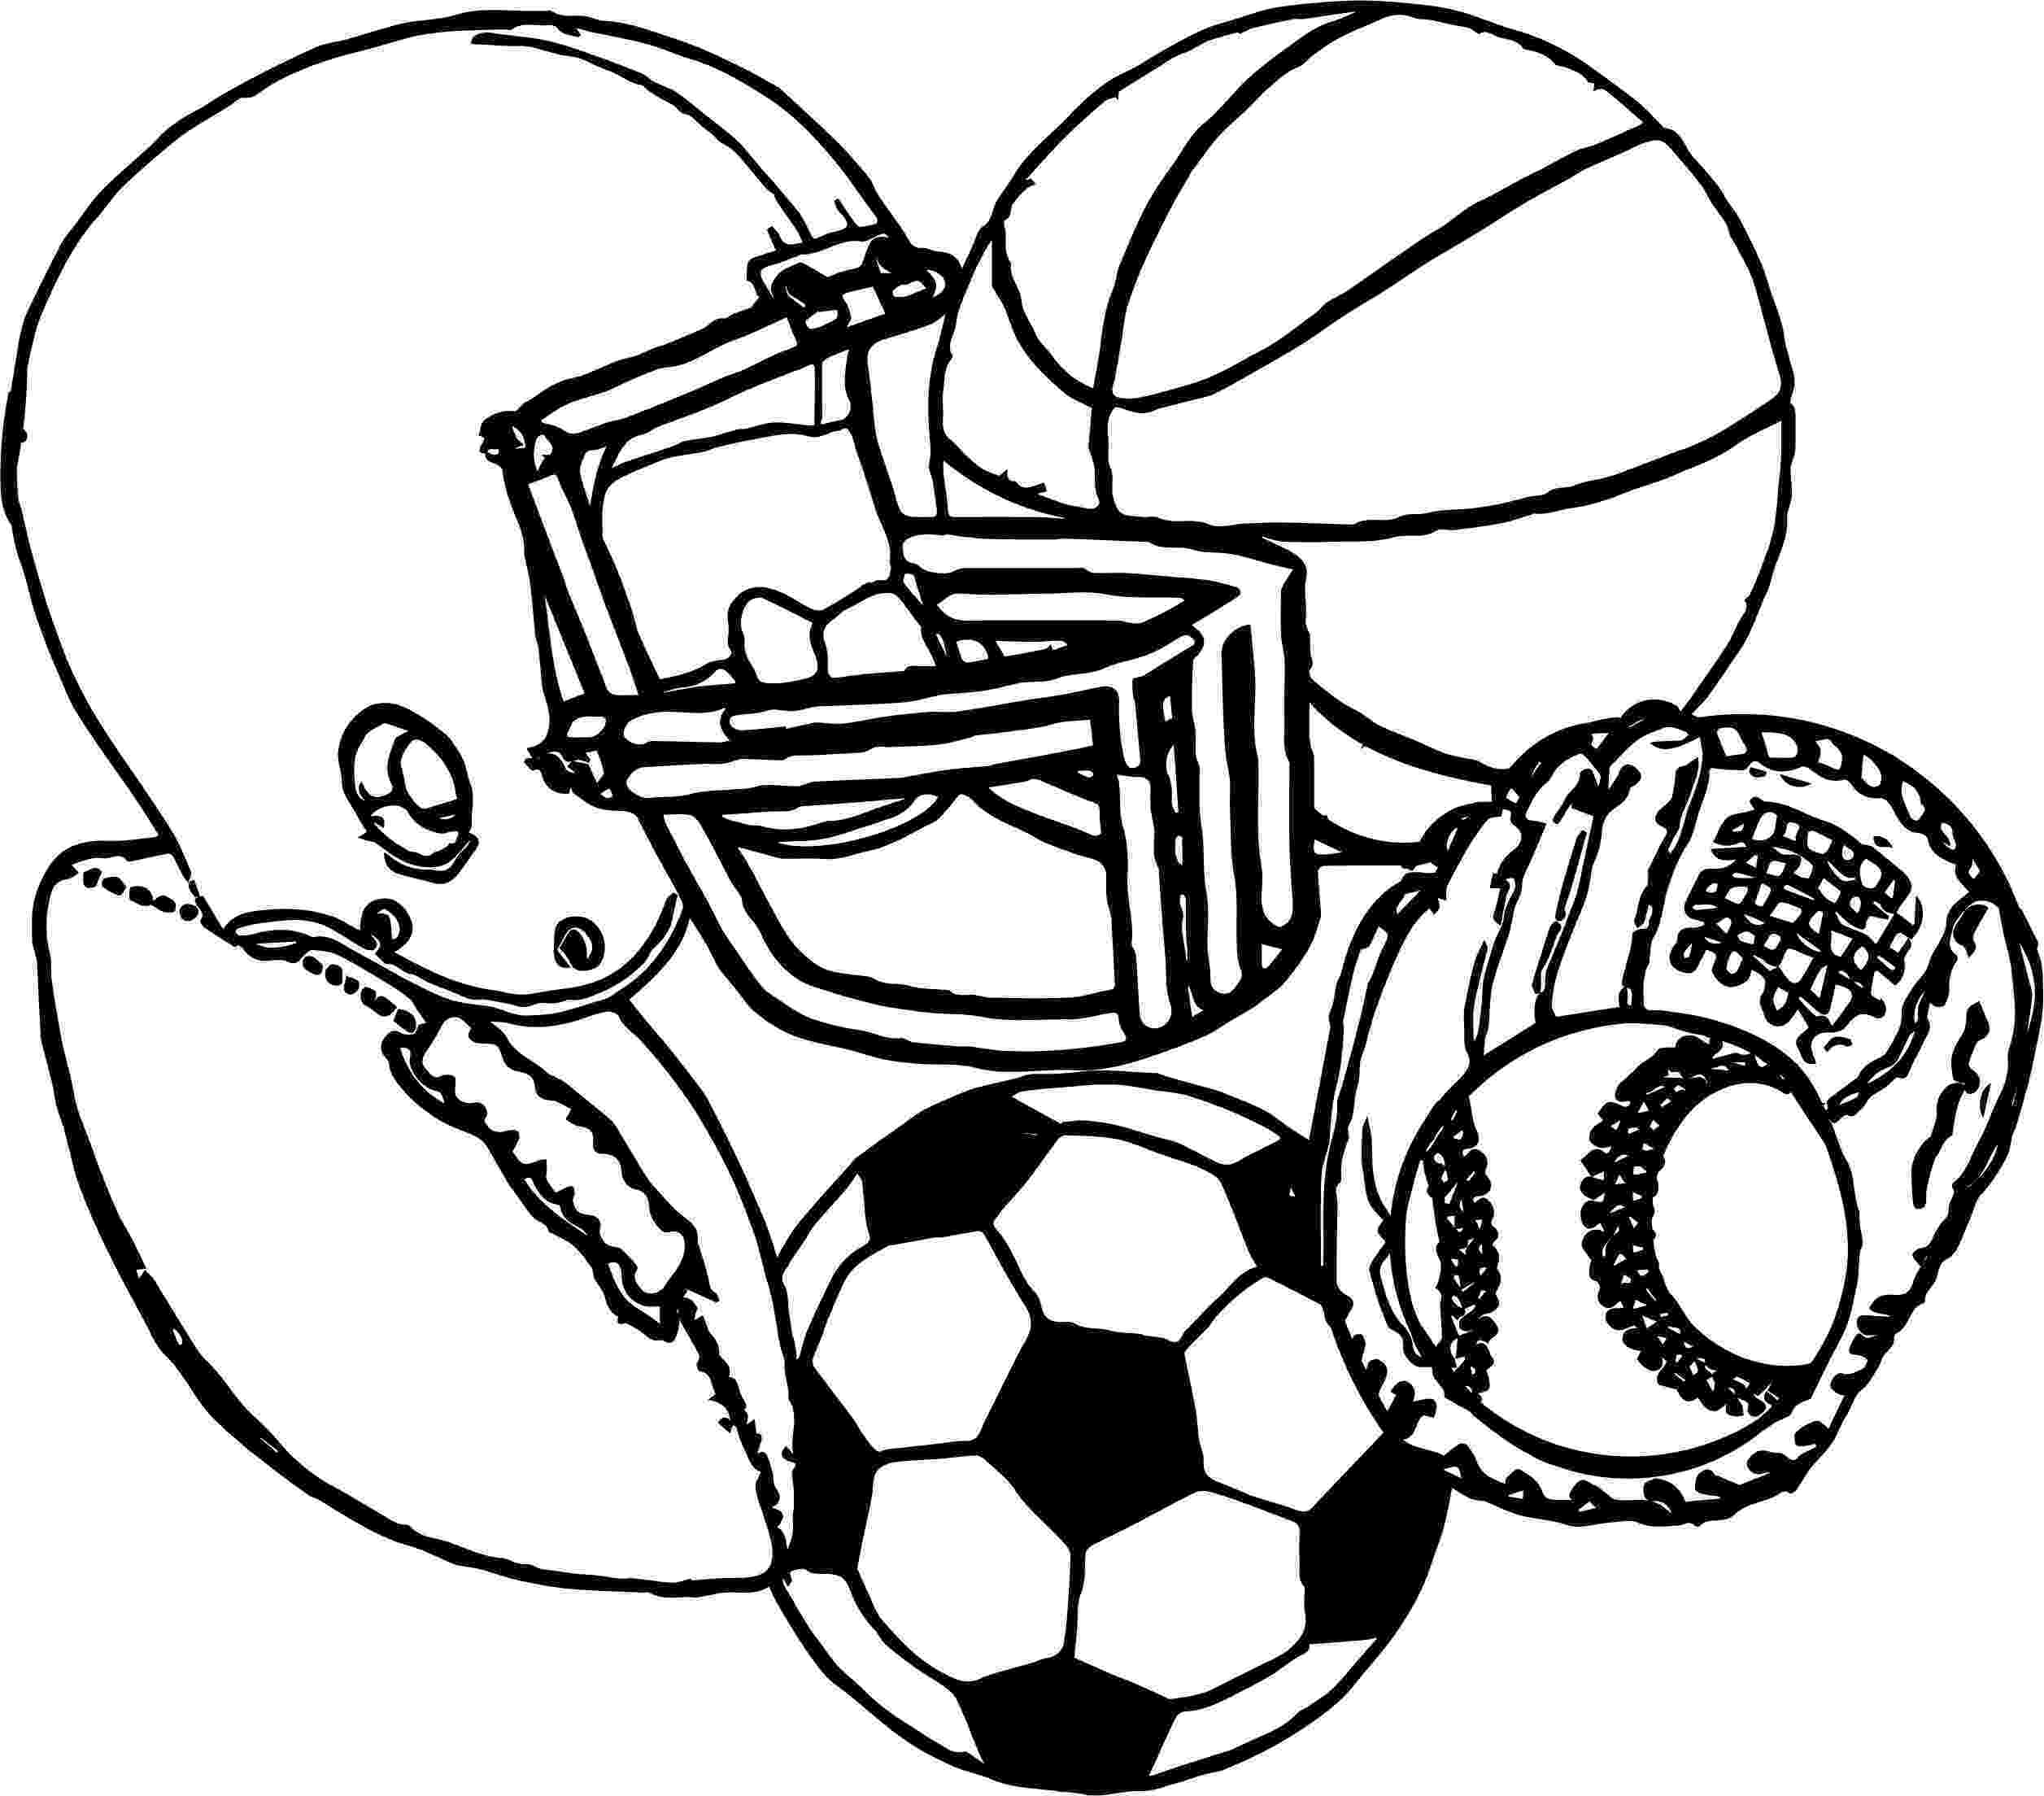 sports colouring sports coloring pages coloring pages to print sports colouring 